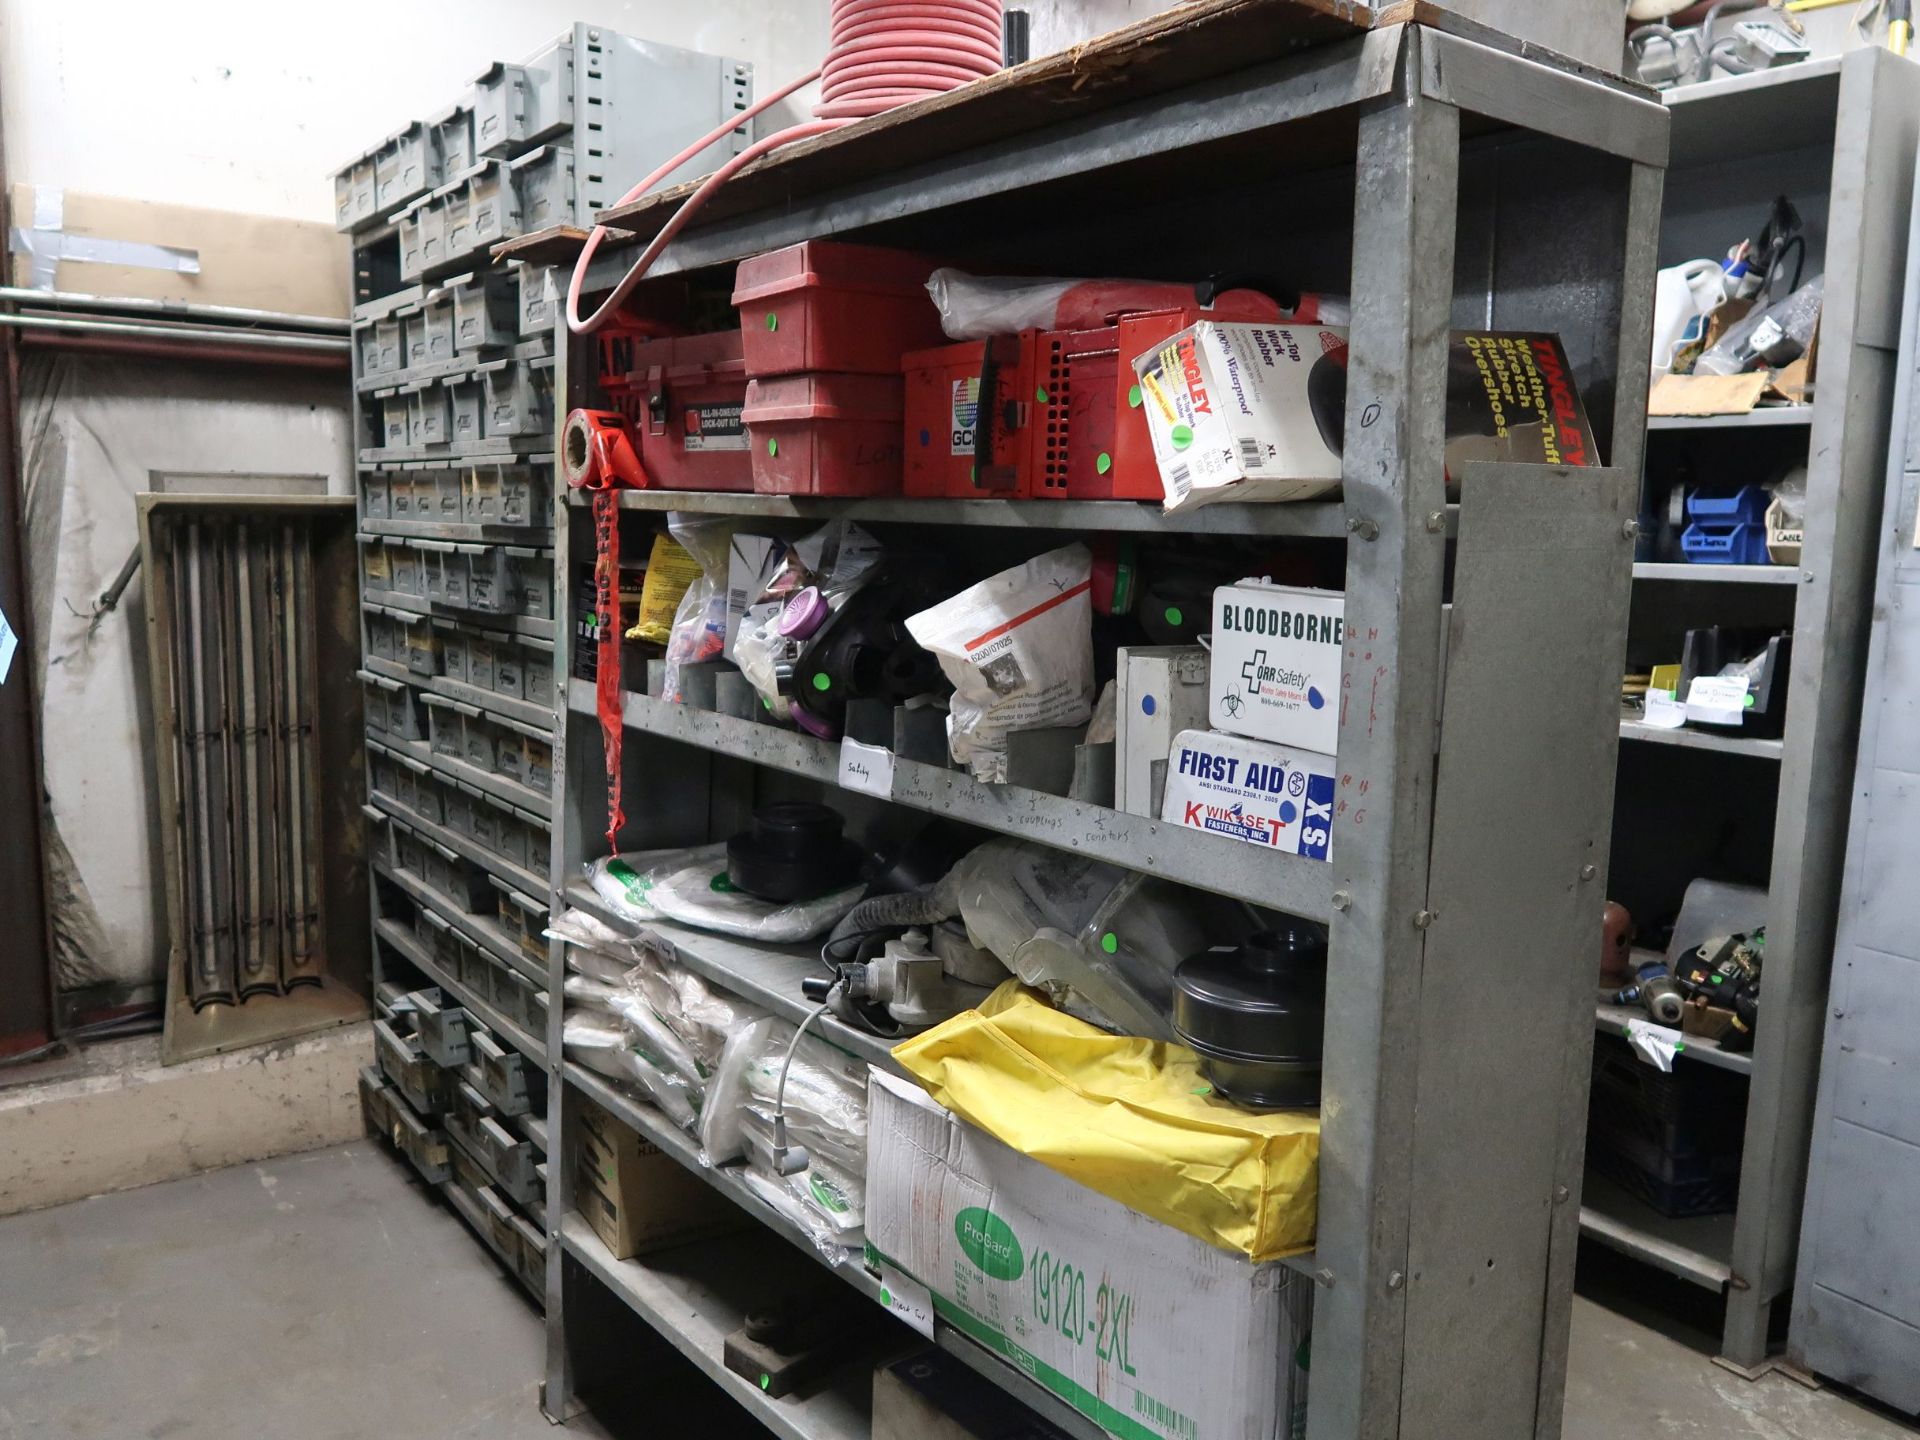 SECTIONS MISCELLANEOUS SIZE STEEL SHELVING **DELAY REMOVAL - PICK UP ON 4-17-2018** - Image 6 of 6